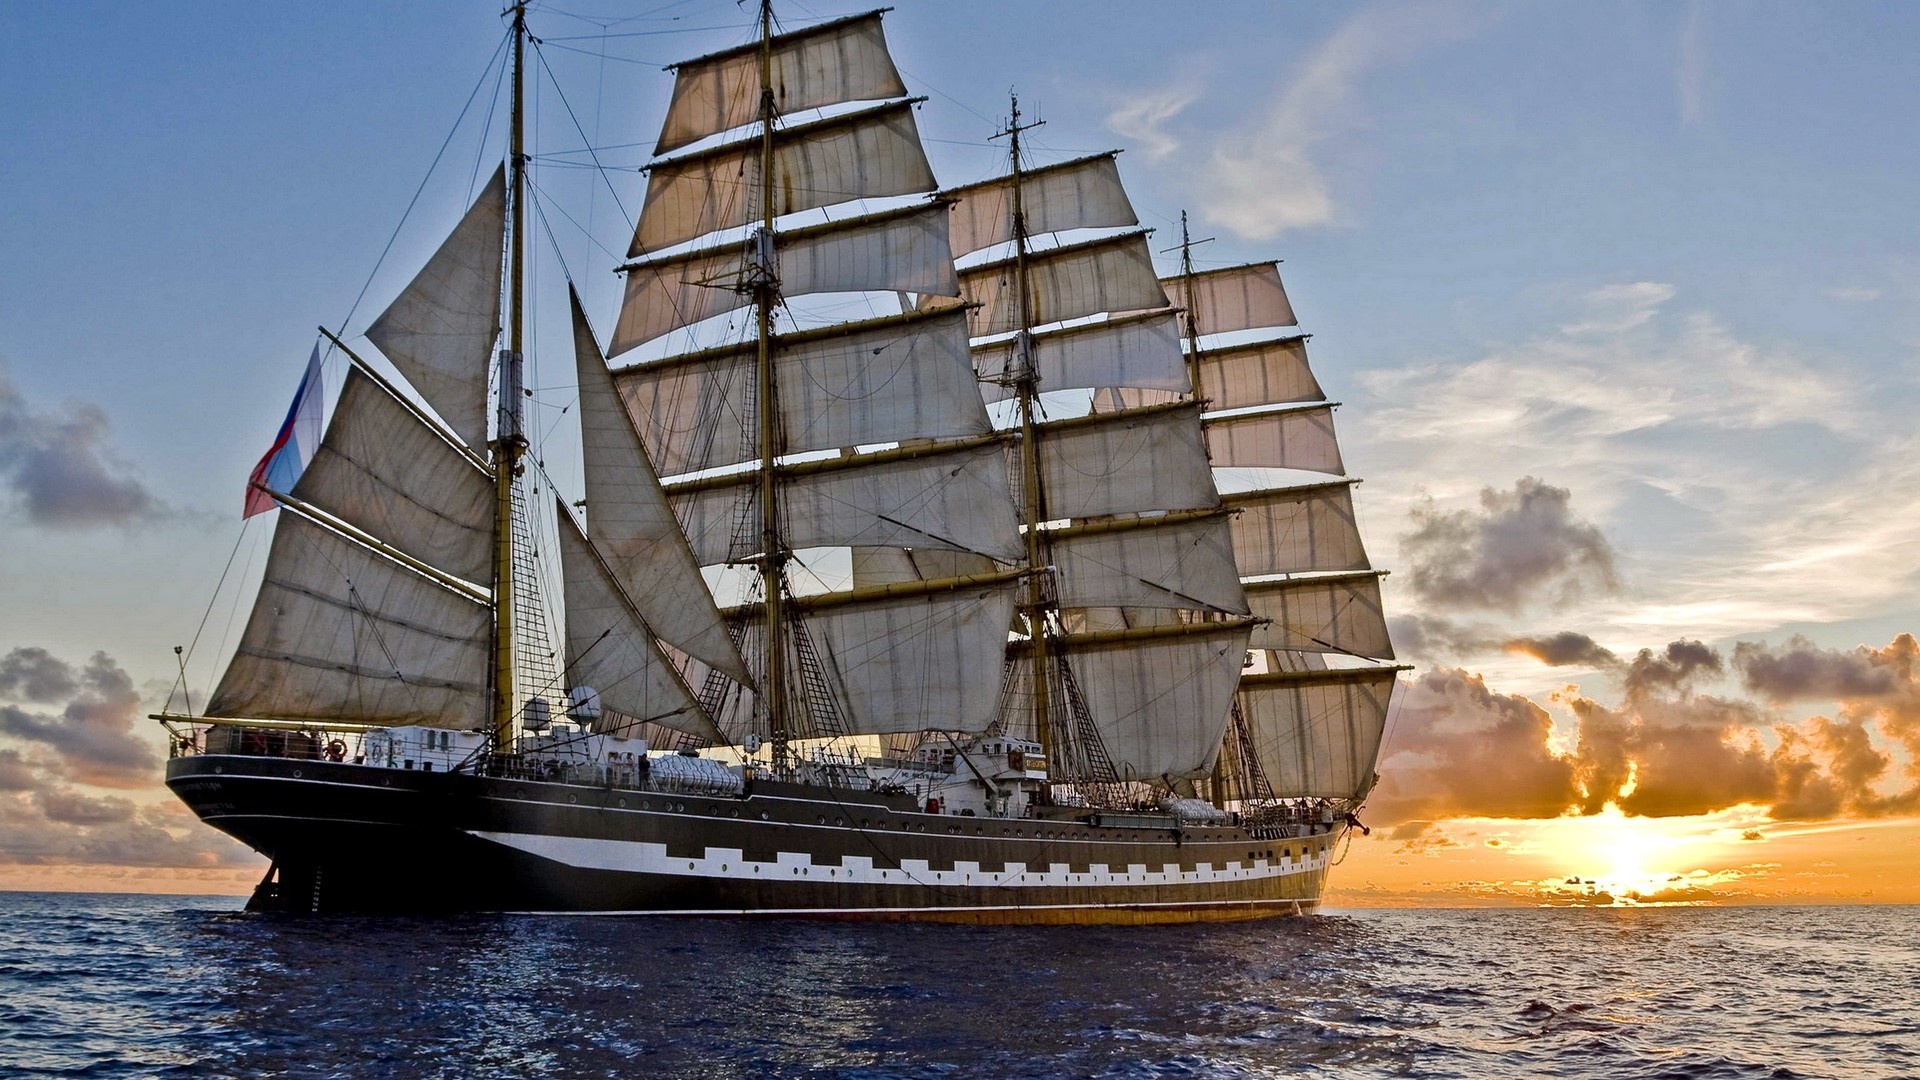 Windjammer: Kruzenshtern, The four-masted barque, Ex “Padua”, Built in 1926 in Germany. 1920x1080 Full HD Background.